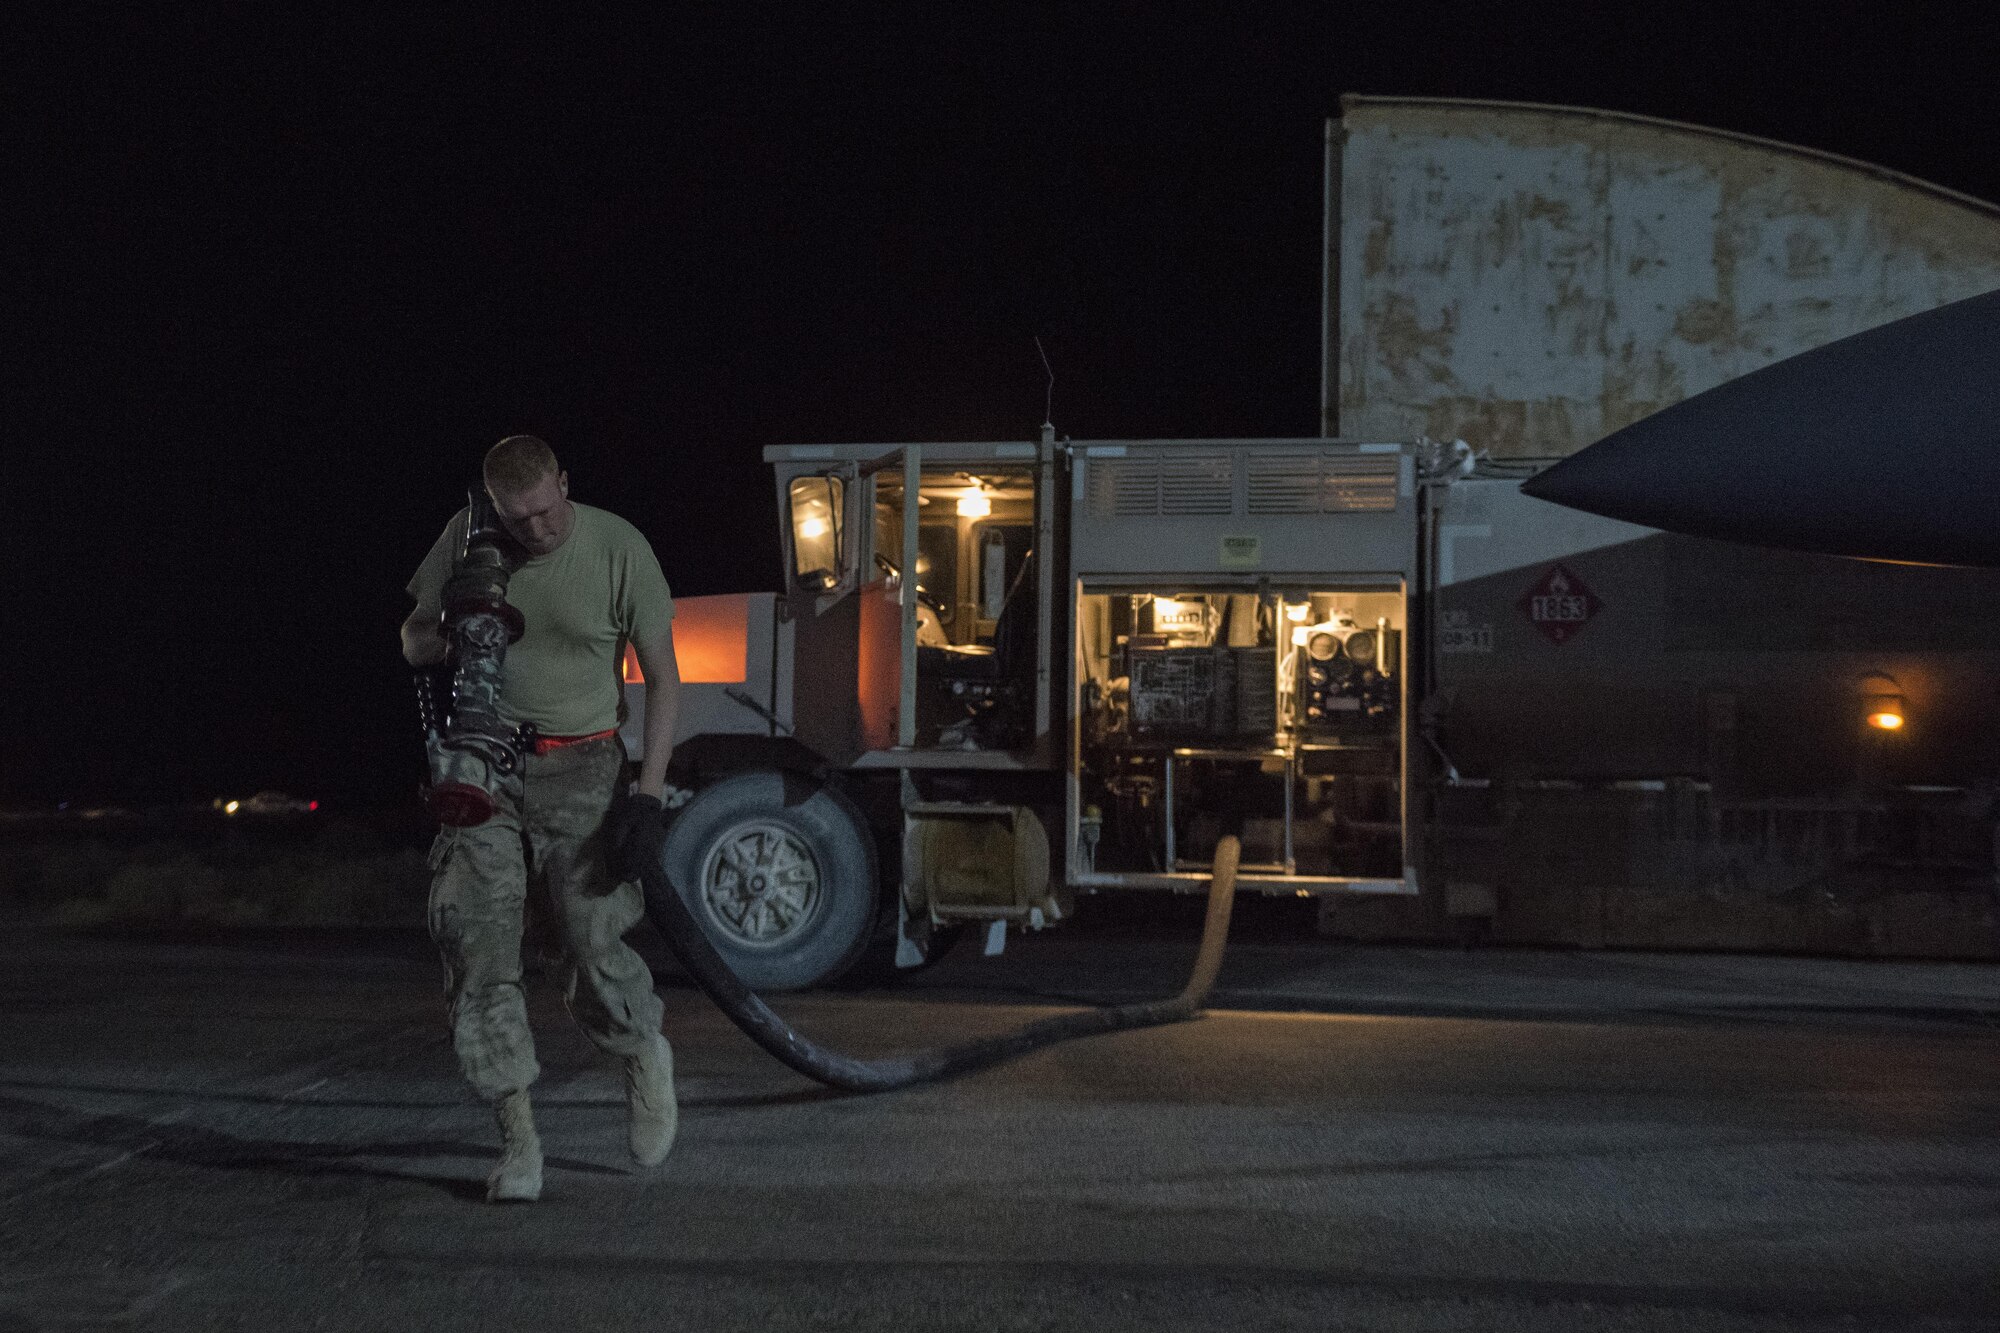 Staff Sgt. Kenneth Zaun, 332nd Expeditionary Logistics Readiness Squadron fuels flight controller, pulls out a fuel nozzle to refuel a F-15E Strike Eagle, July 22, 2017 in Southwest Asia. Within 20 minutes of landing members of the 332nd ELRS are in place to refuel aircraft for its next mission. (U.S. Air Force photo/Senior Airman Damon Kasberg)